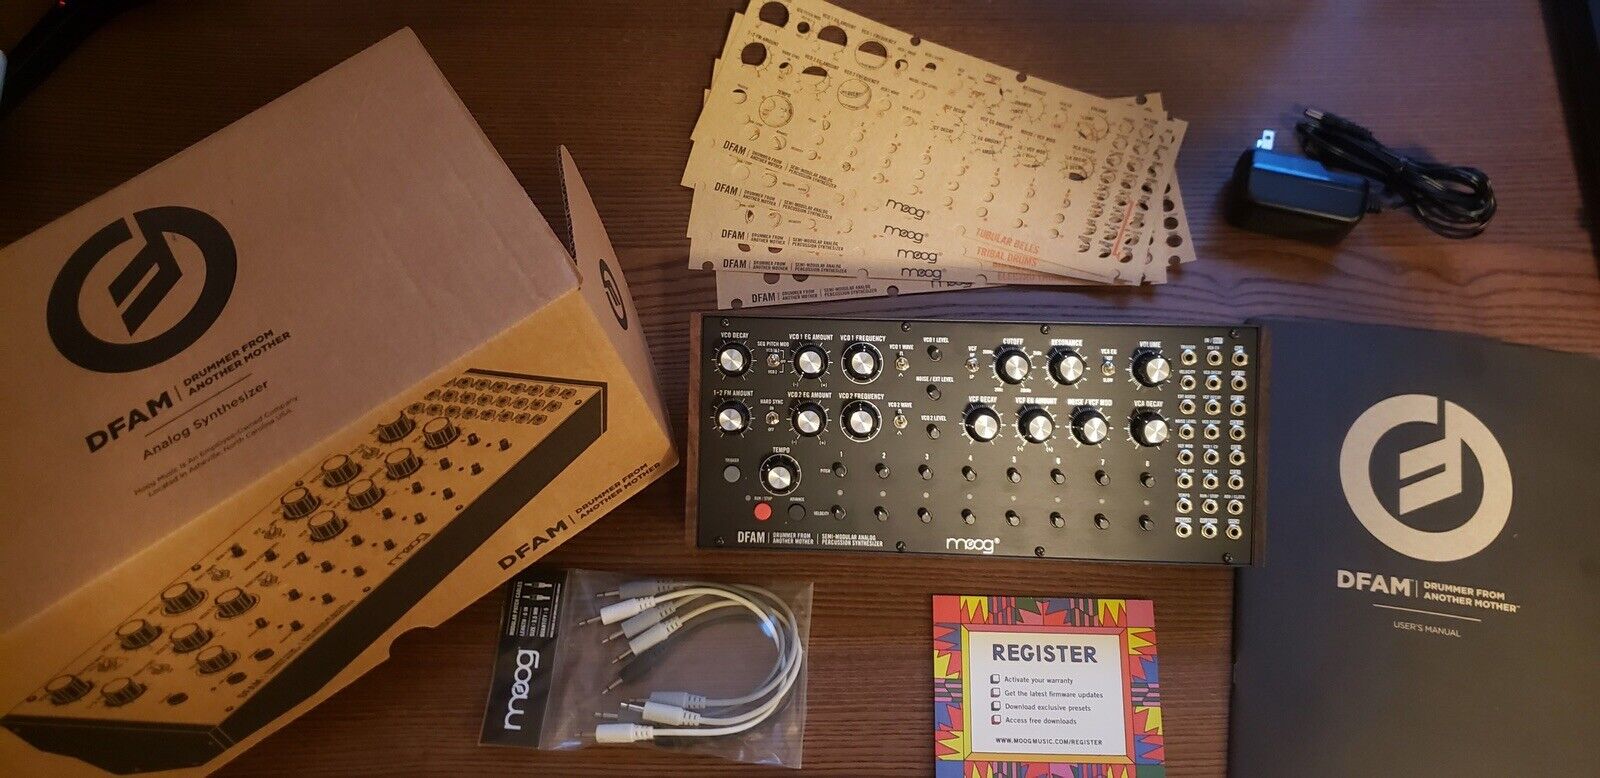 dfam moog analog synthesizer- Opened And Used Once. Includes Box, Manual, Cables